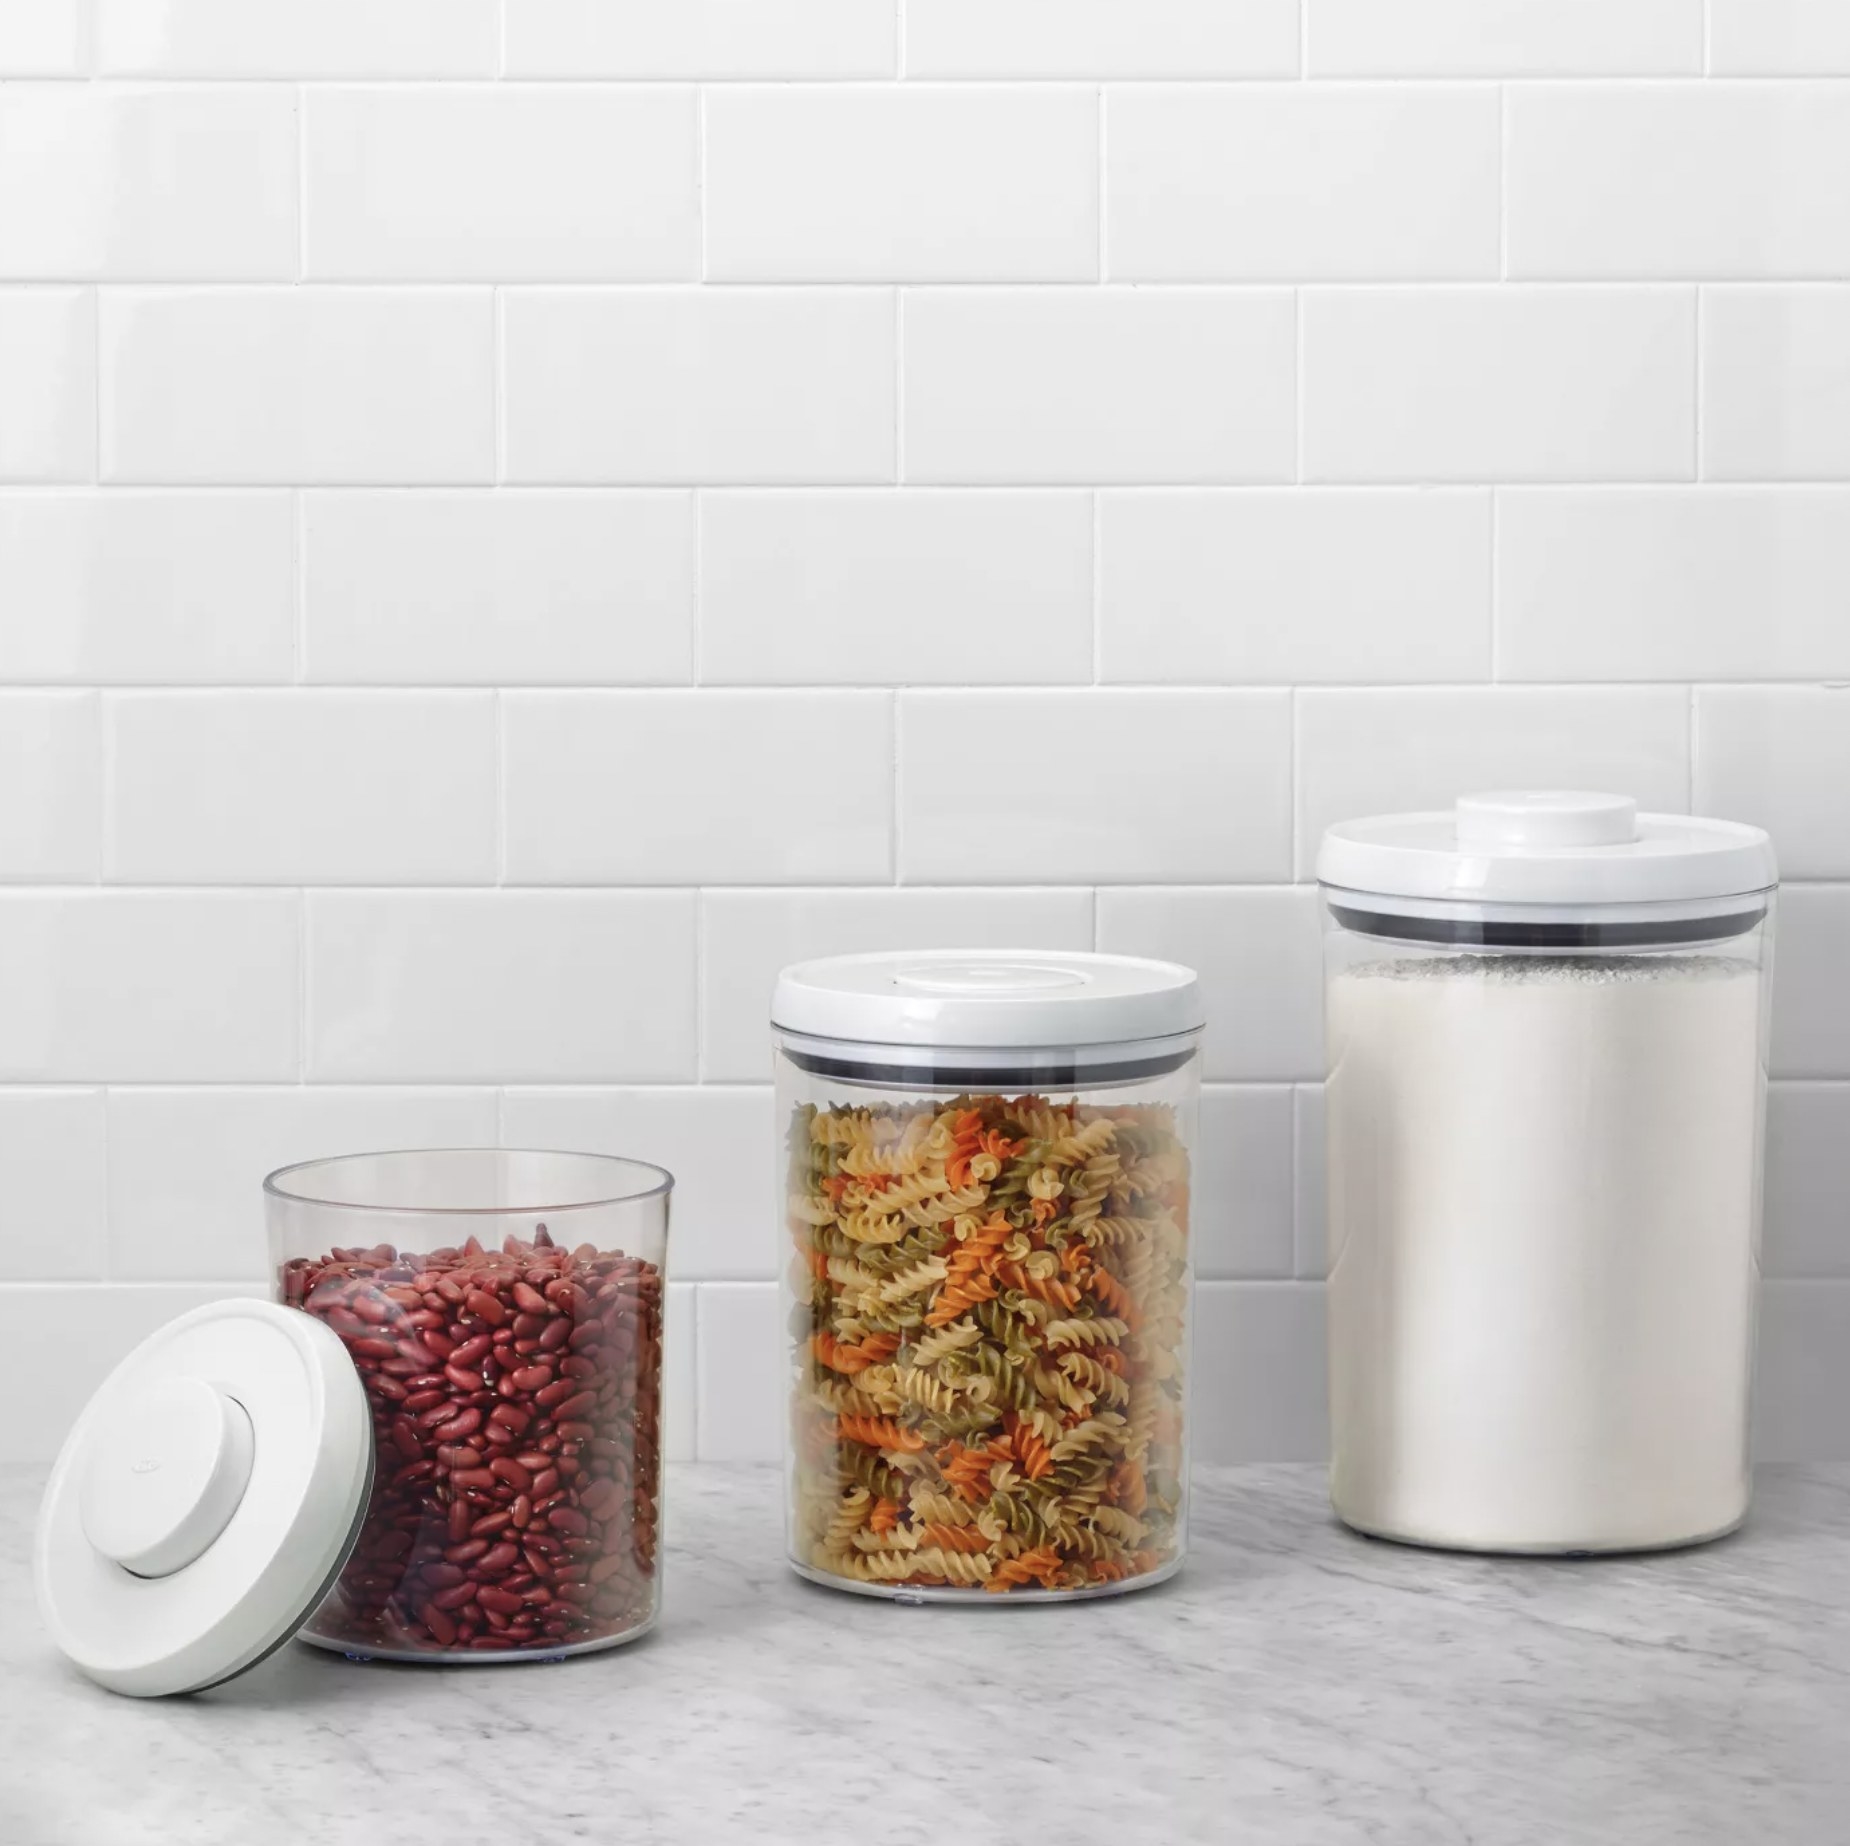 The OXO Food Containers